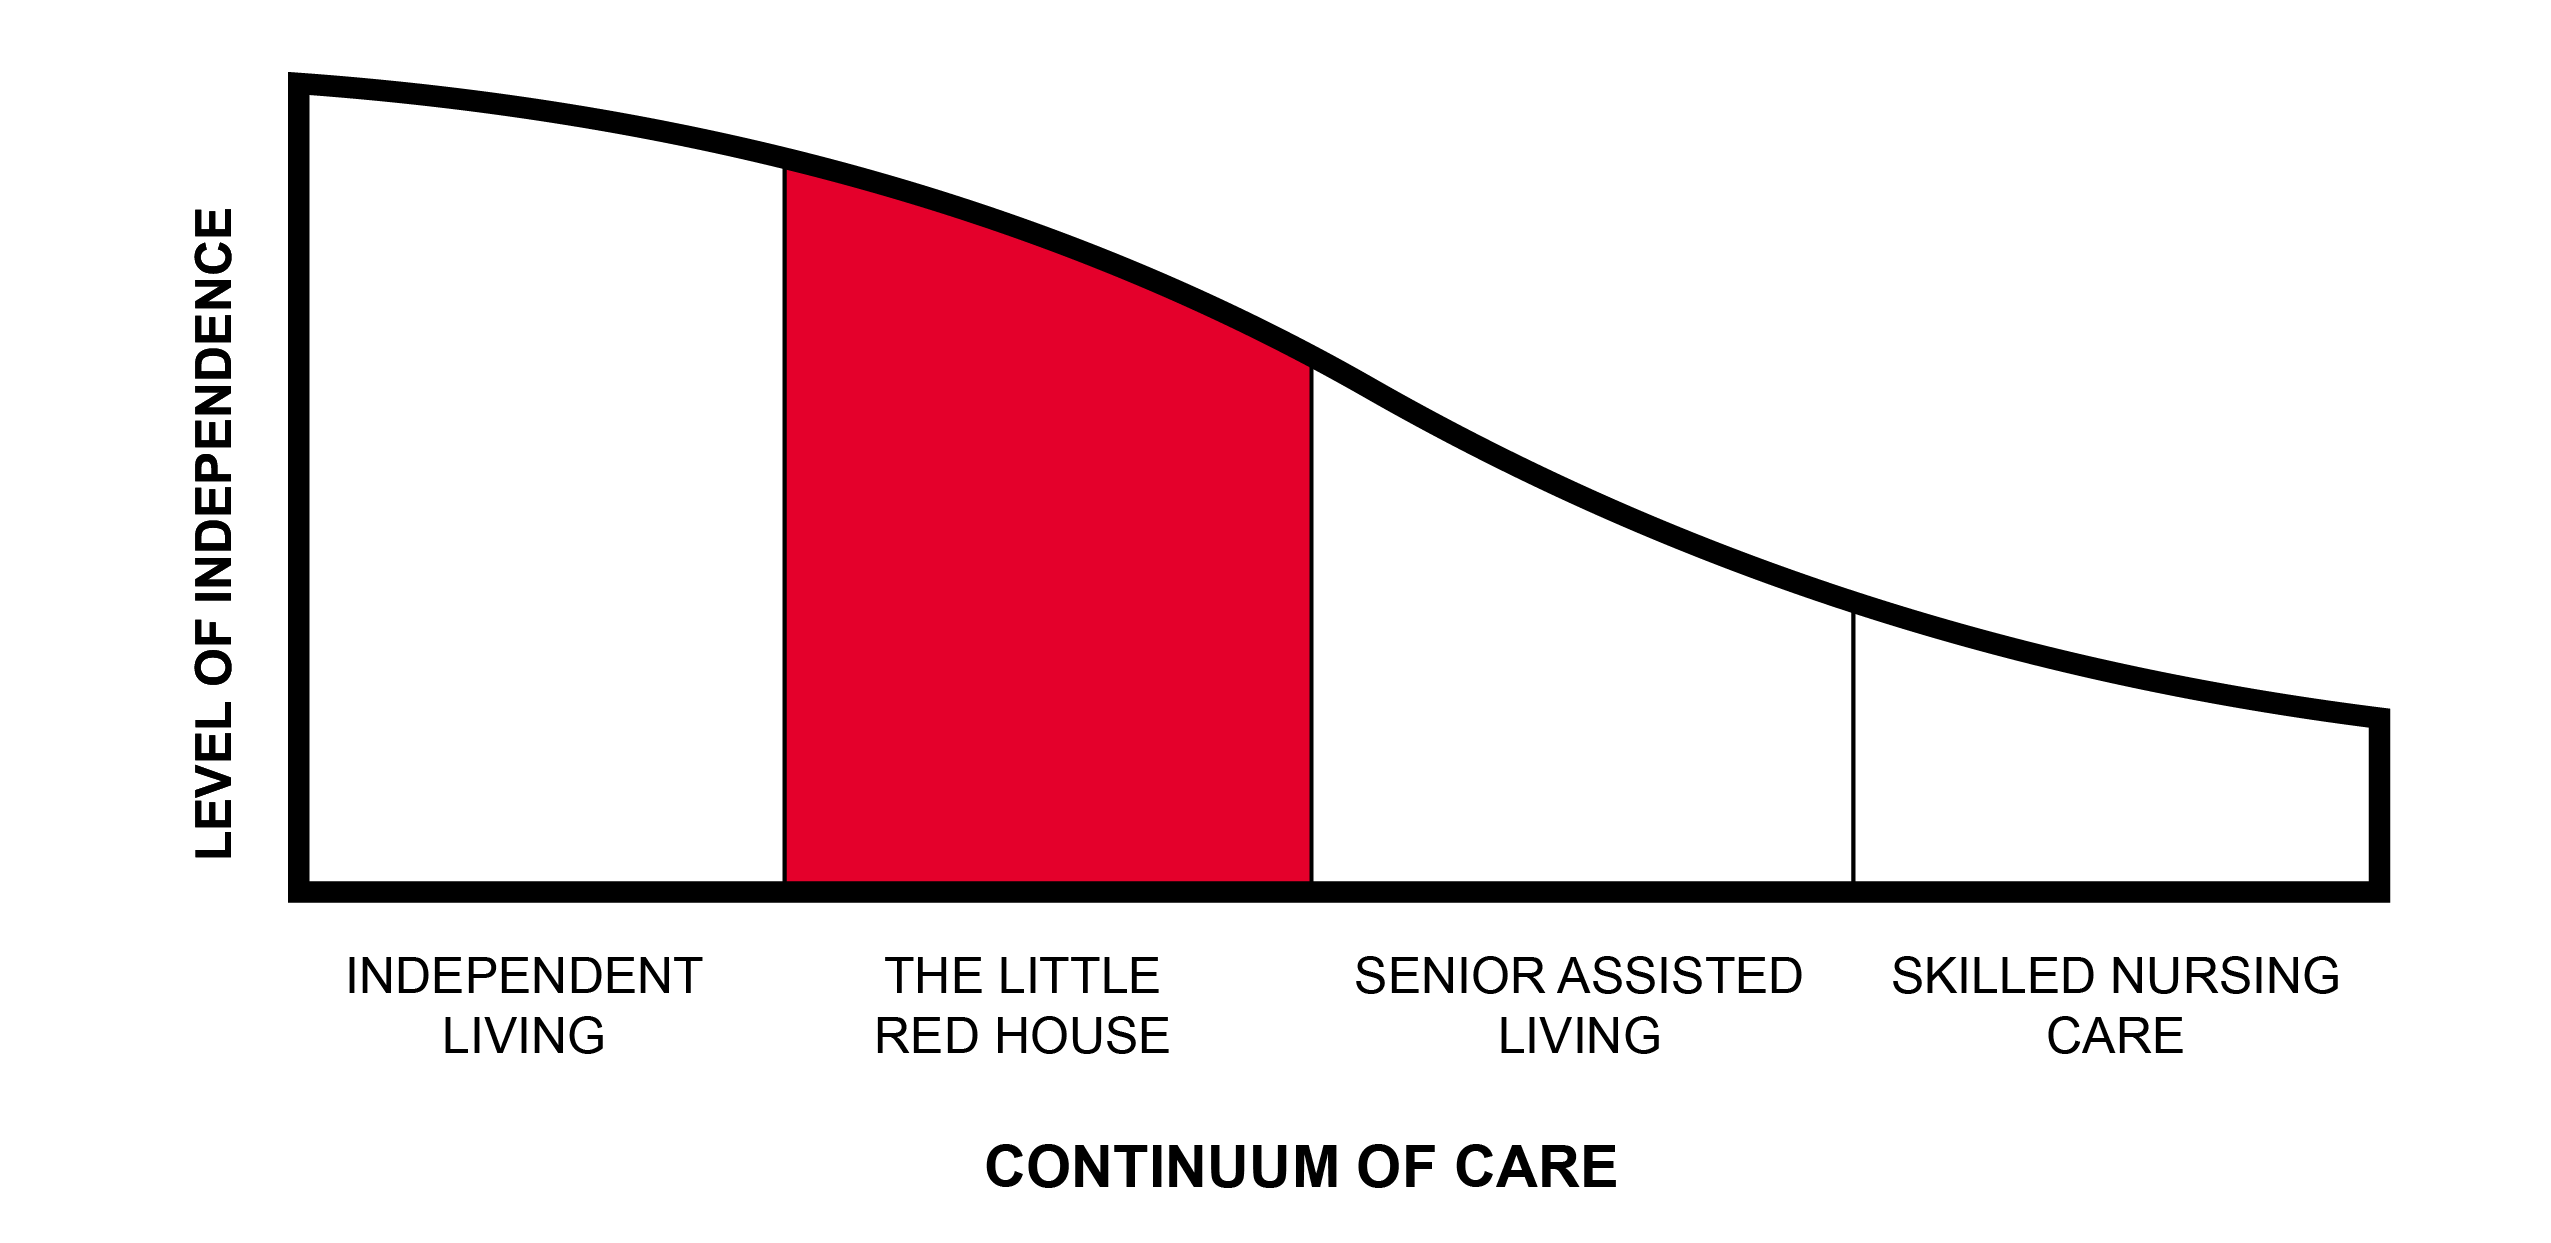 Continuum of Care and Independent living graph shows The Little Red House being a positive environment for adult day care services